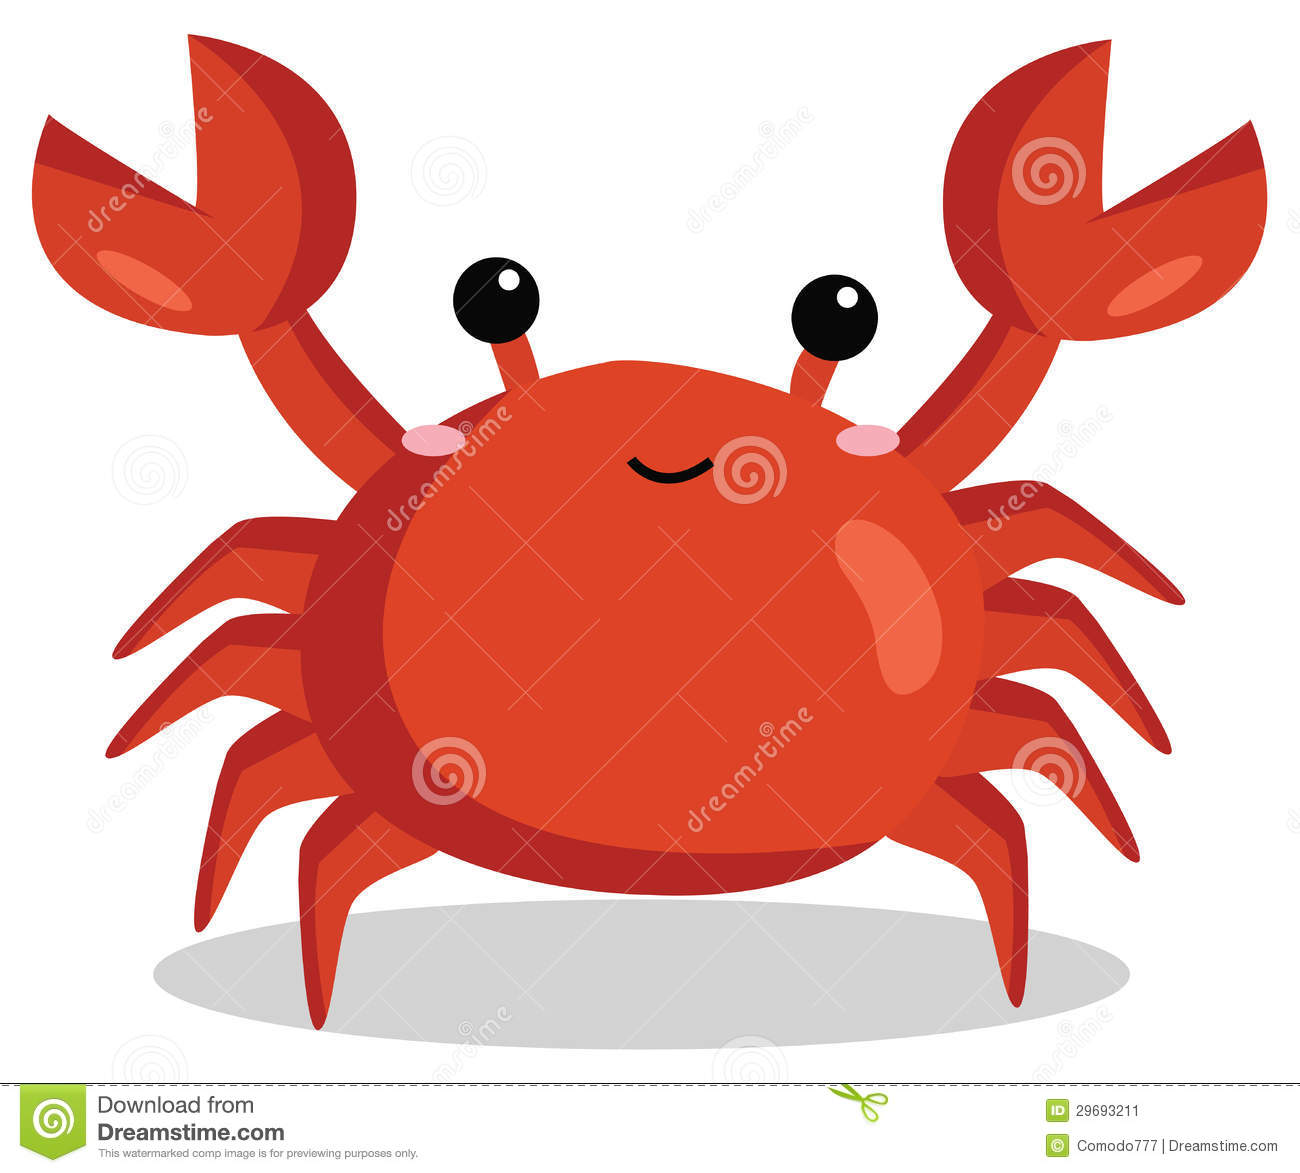 Ghost Crab clipart #13, Download drawings